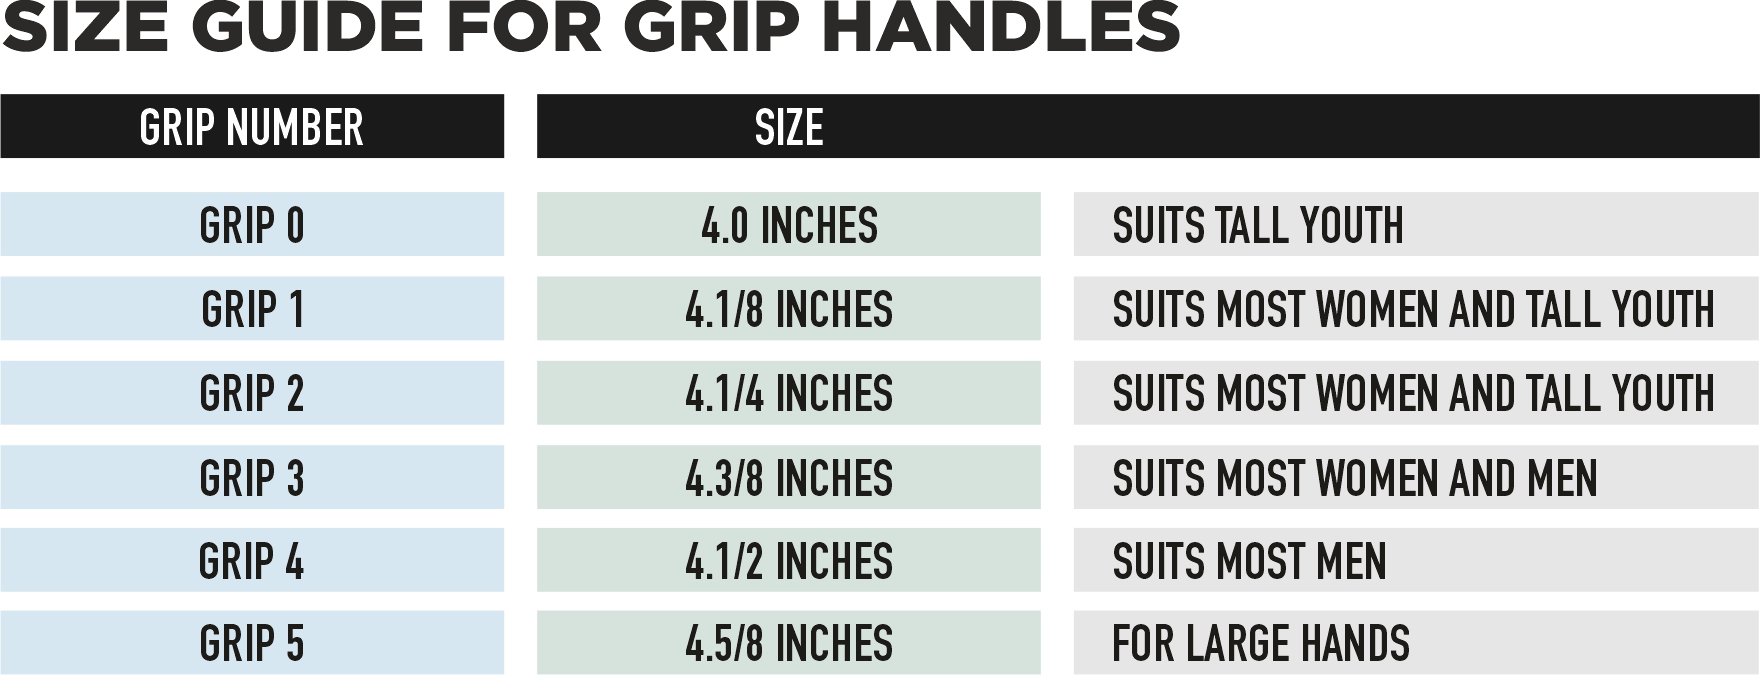 tennis racket size guide